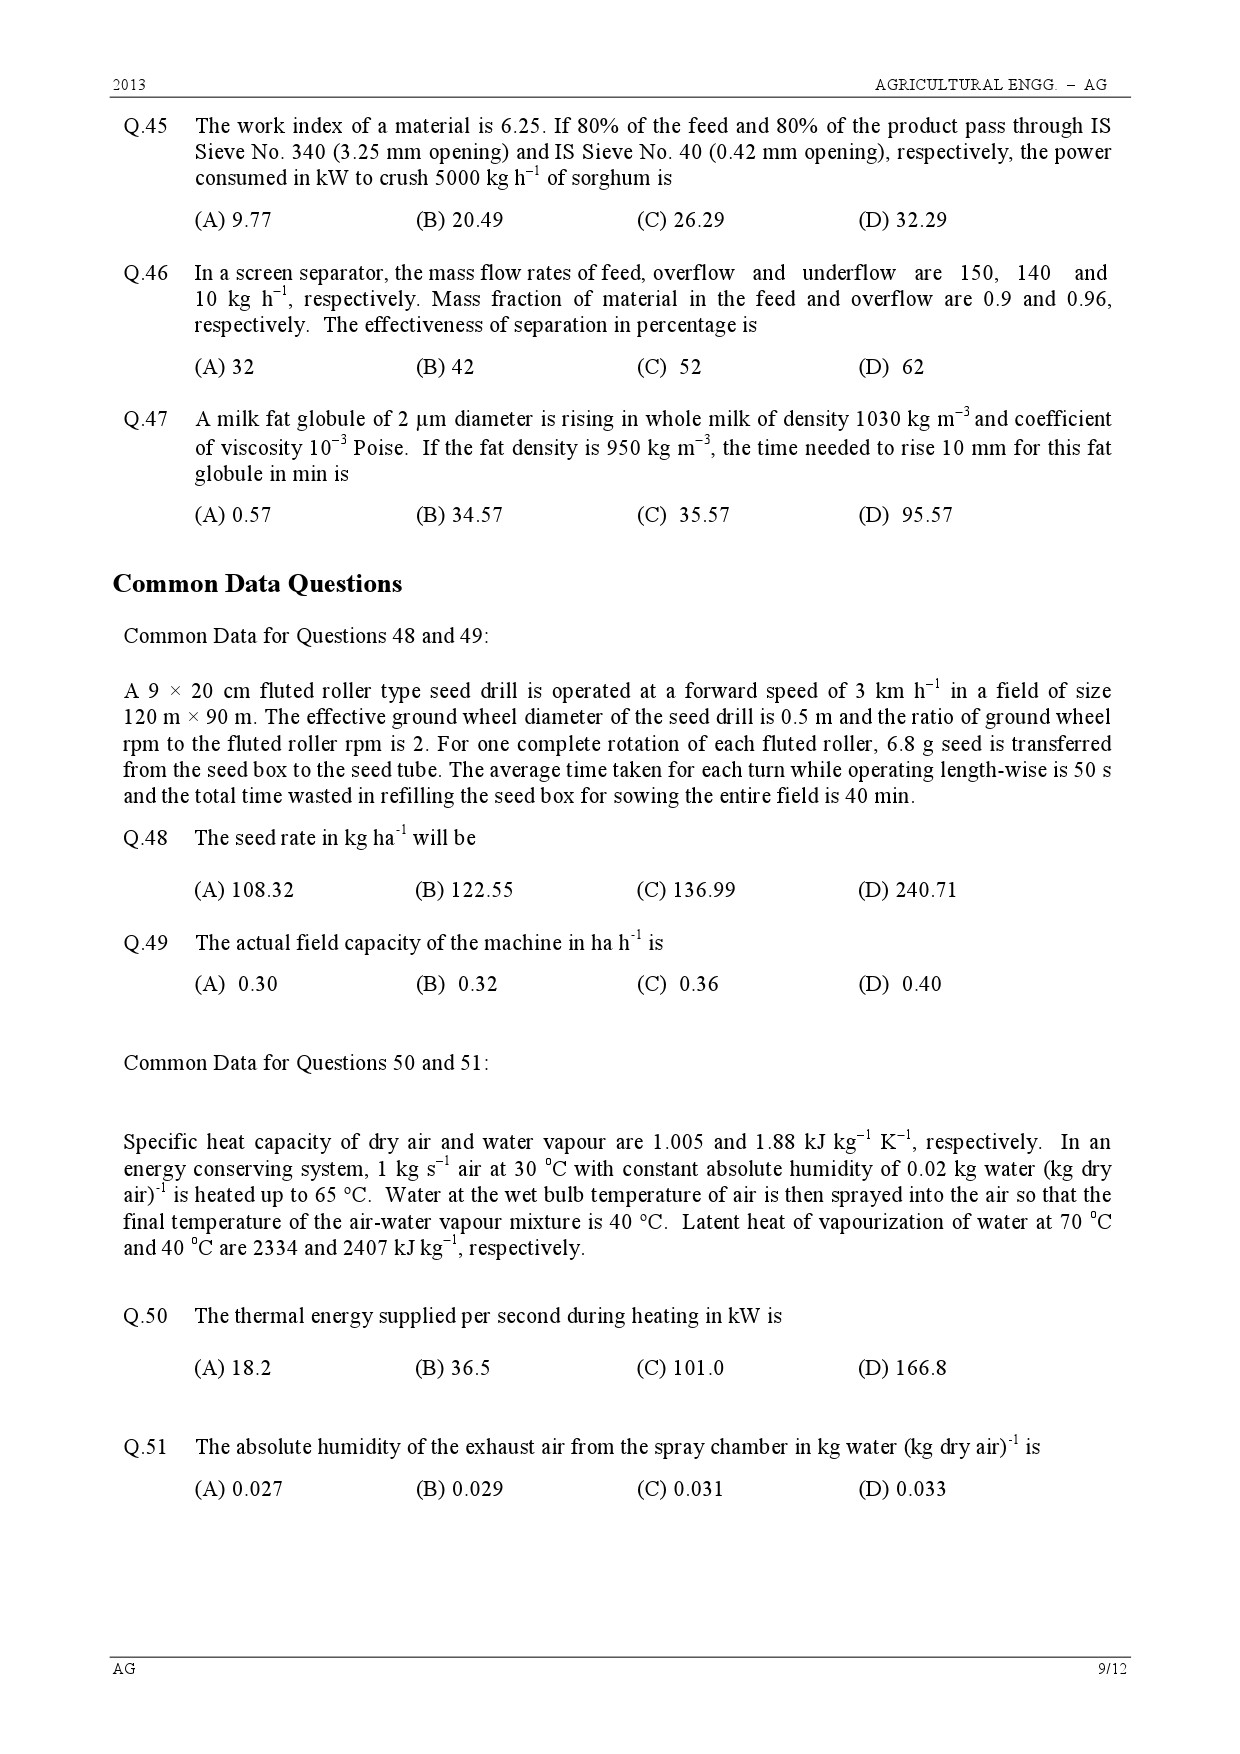 GATE Exam Question Paper 2013 Agricultural Engineering 9